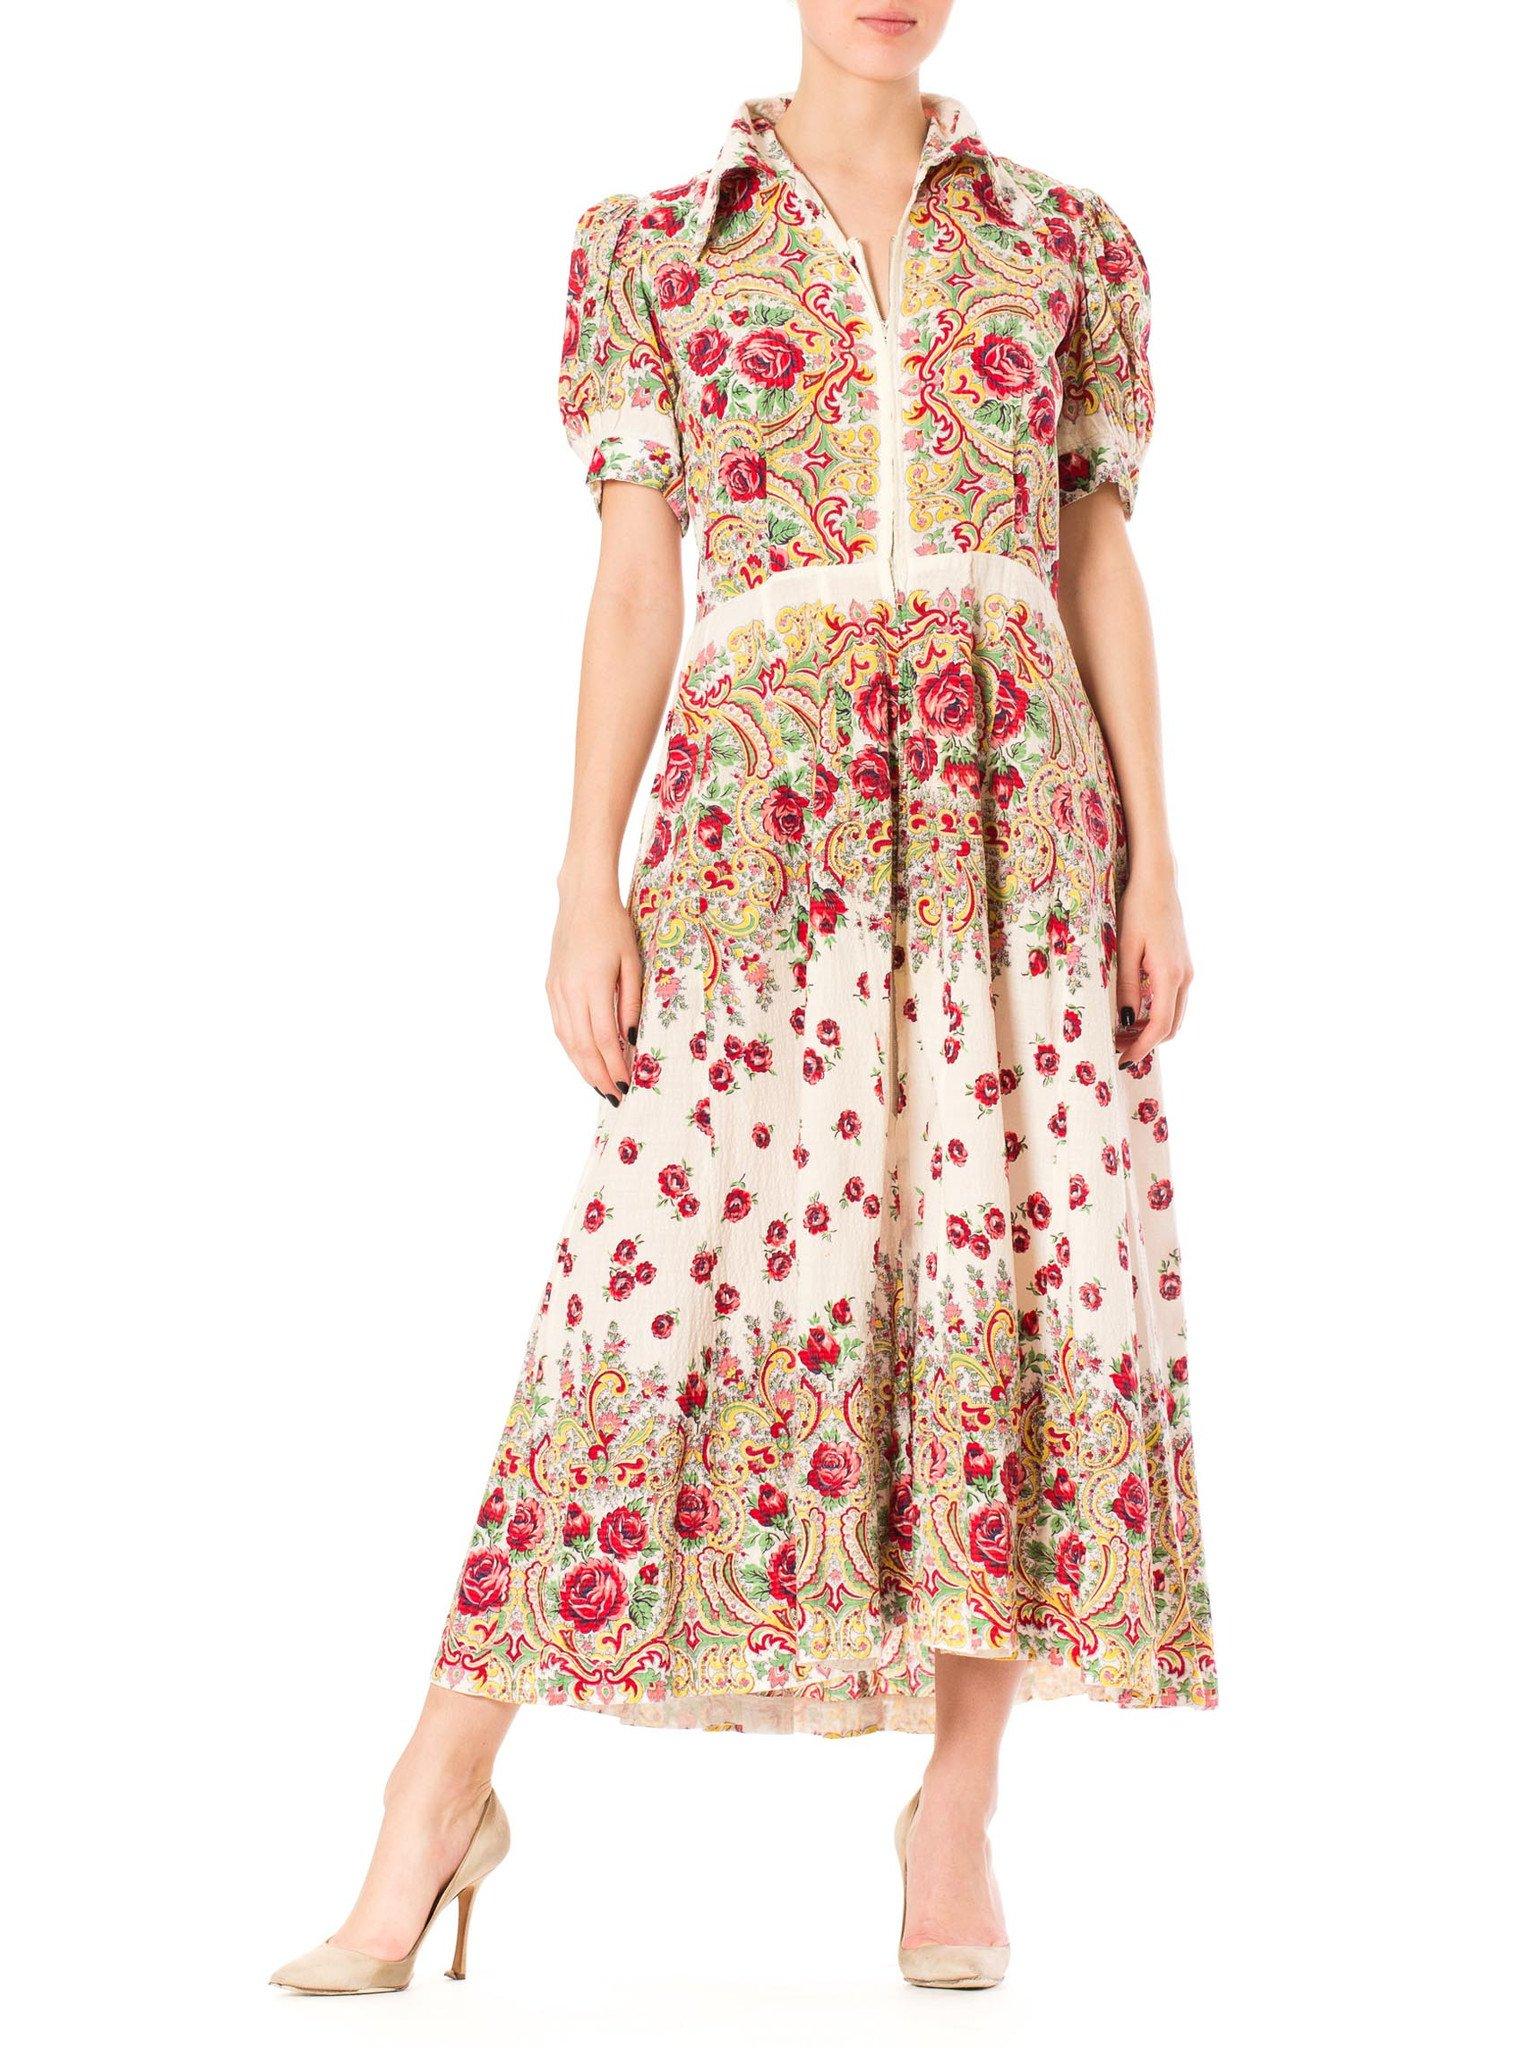 1940S White & Red Cotton Seersucker Bohemian Russian Style Floral Rose Print Short Sleeve House Dress